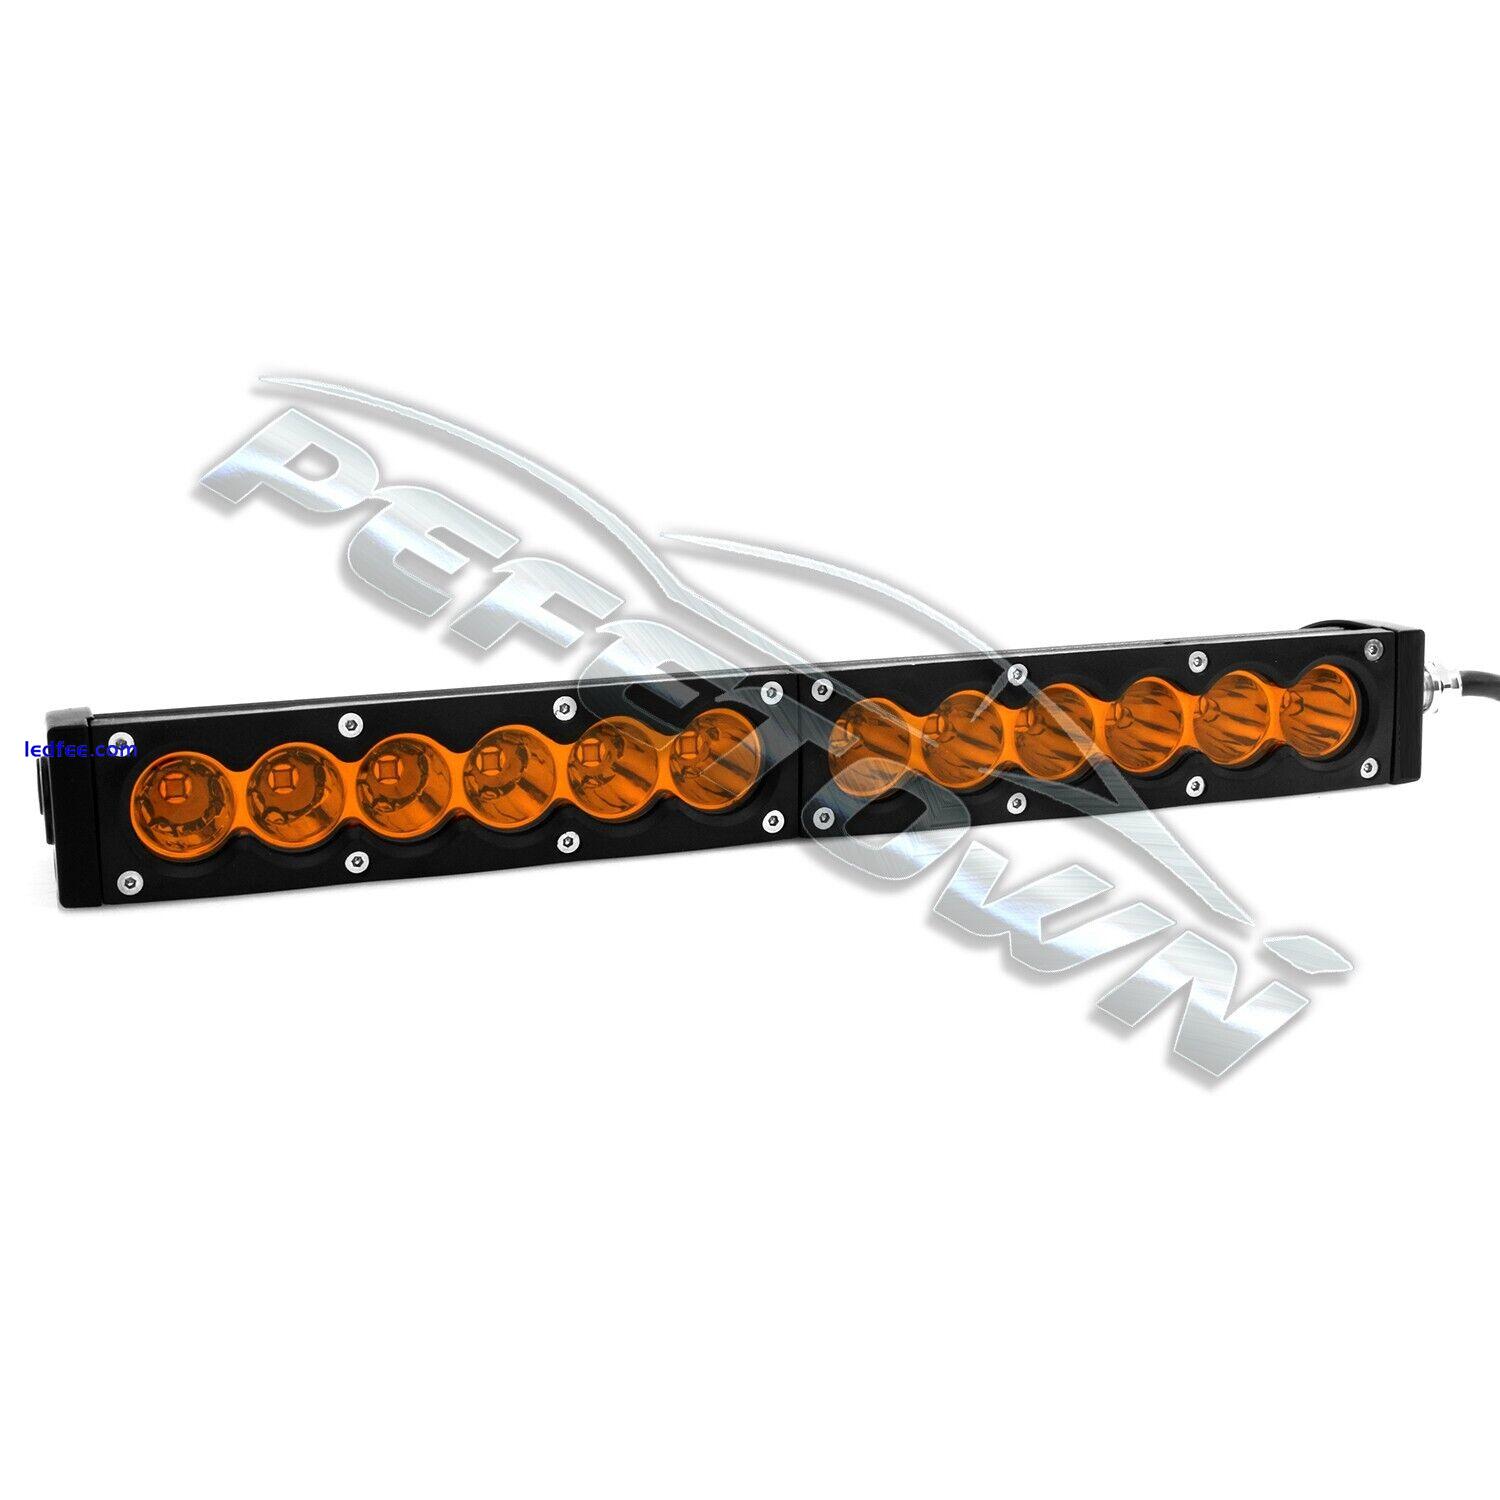 13Inch LED Work Light Bar Spot Offroad Boat SUV 4WD Truck Fog Driving Lamp Amber 3 